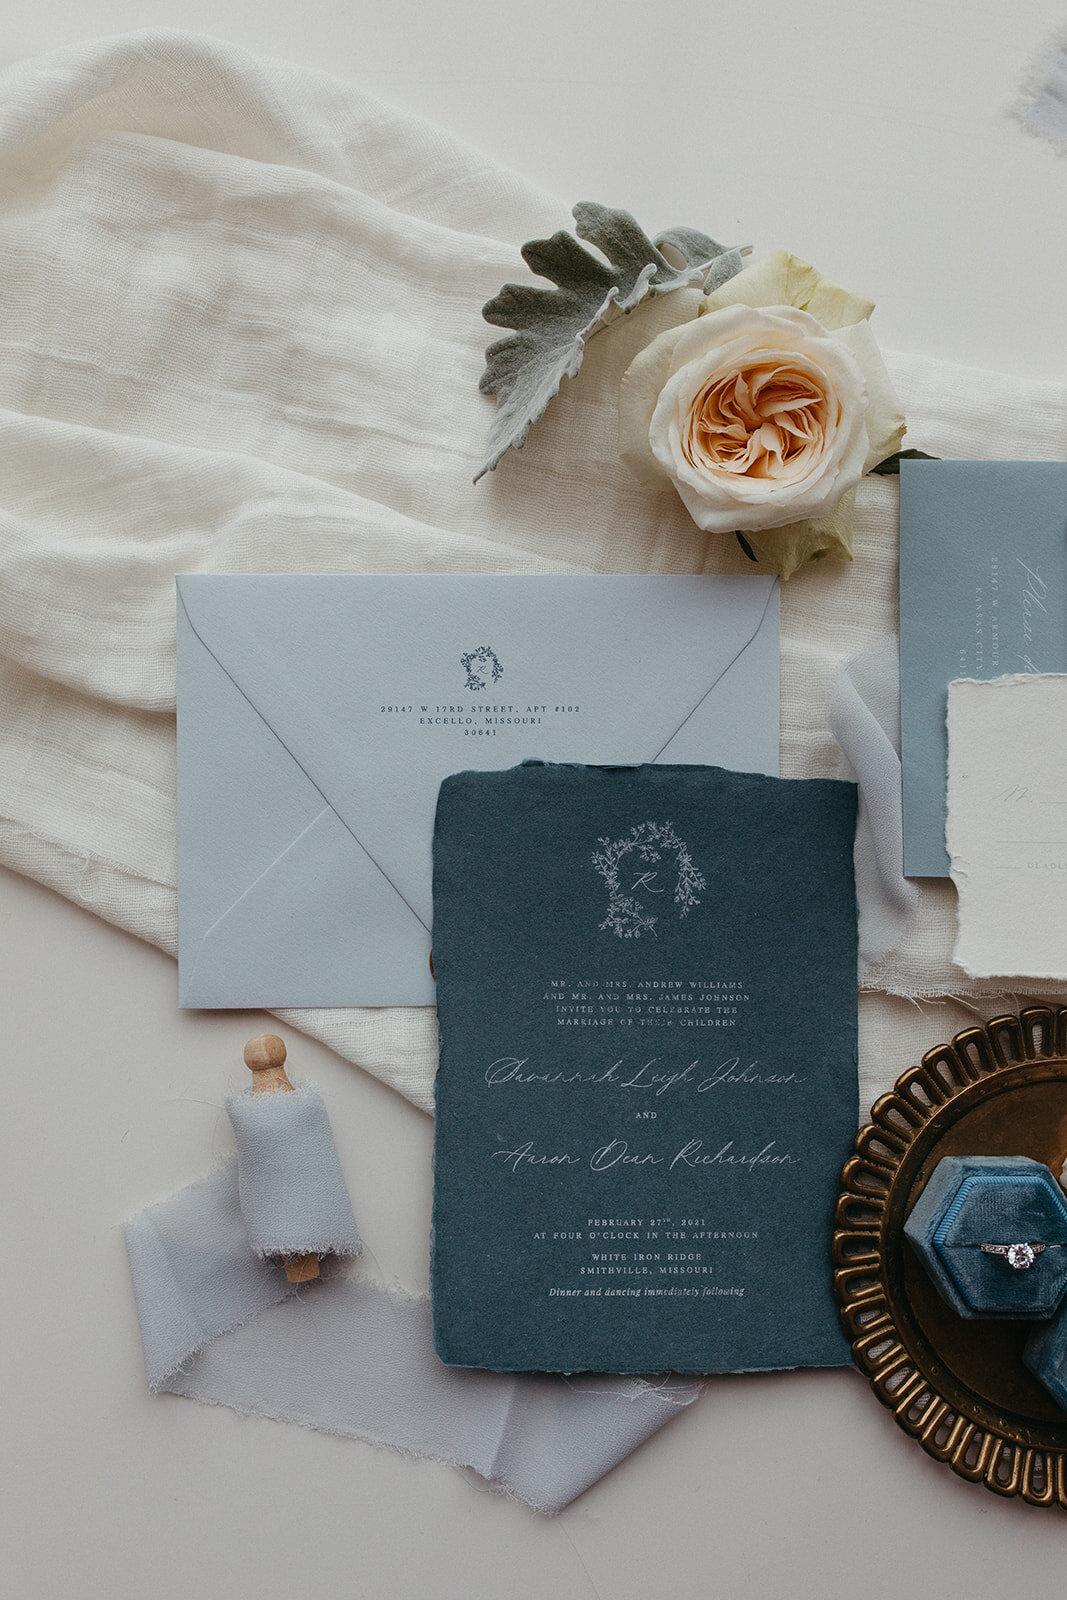 An assortment of blue and gray wedding stationery with white cursive font atop fabric, with a wedding ring in blue velvet box